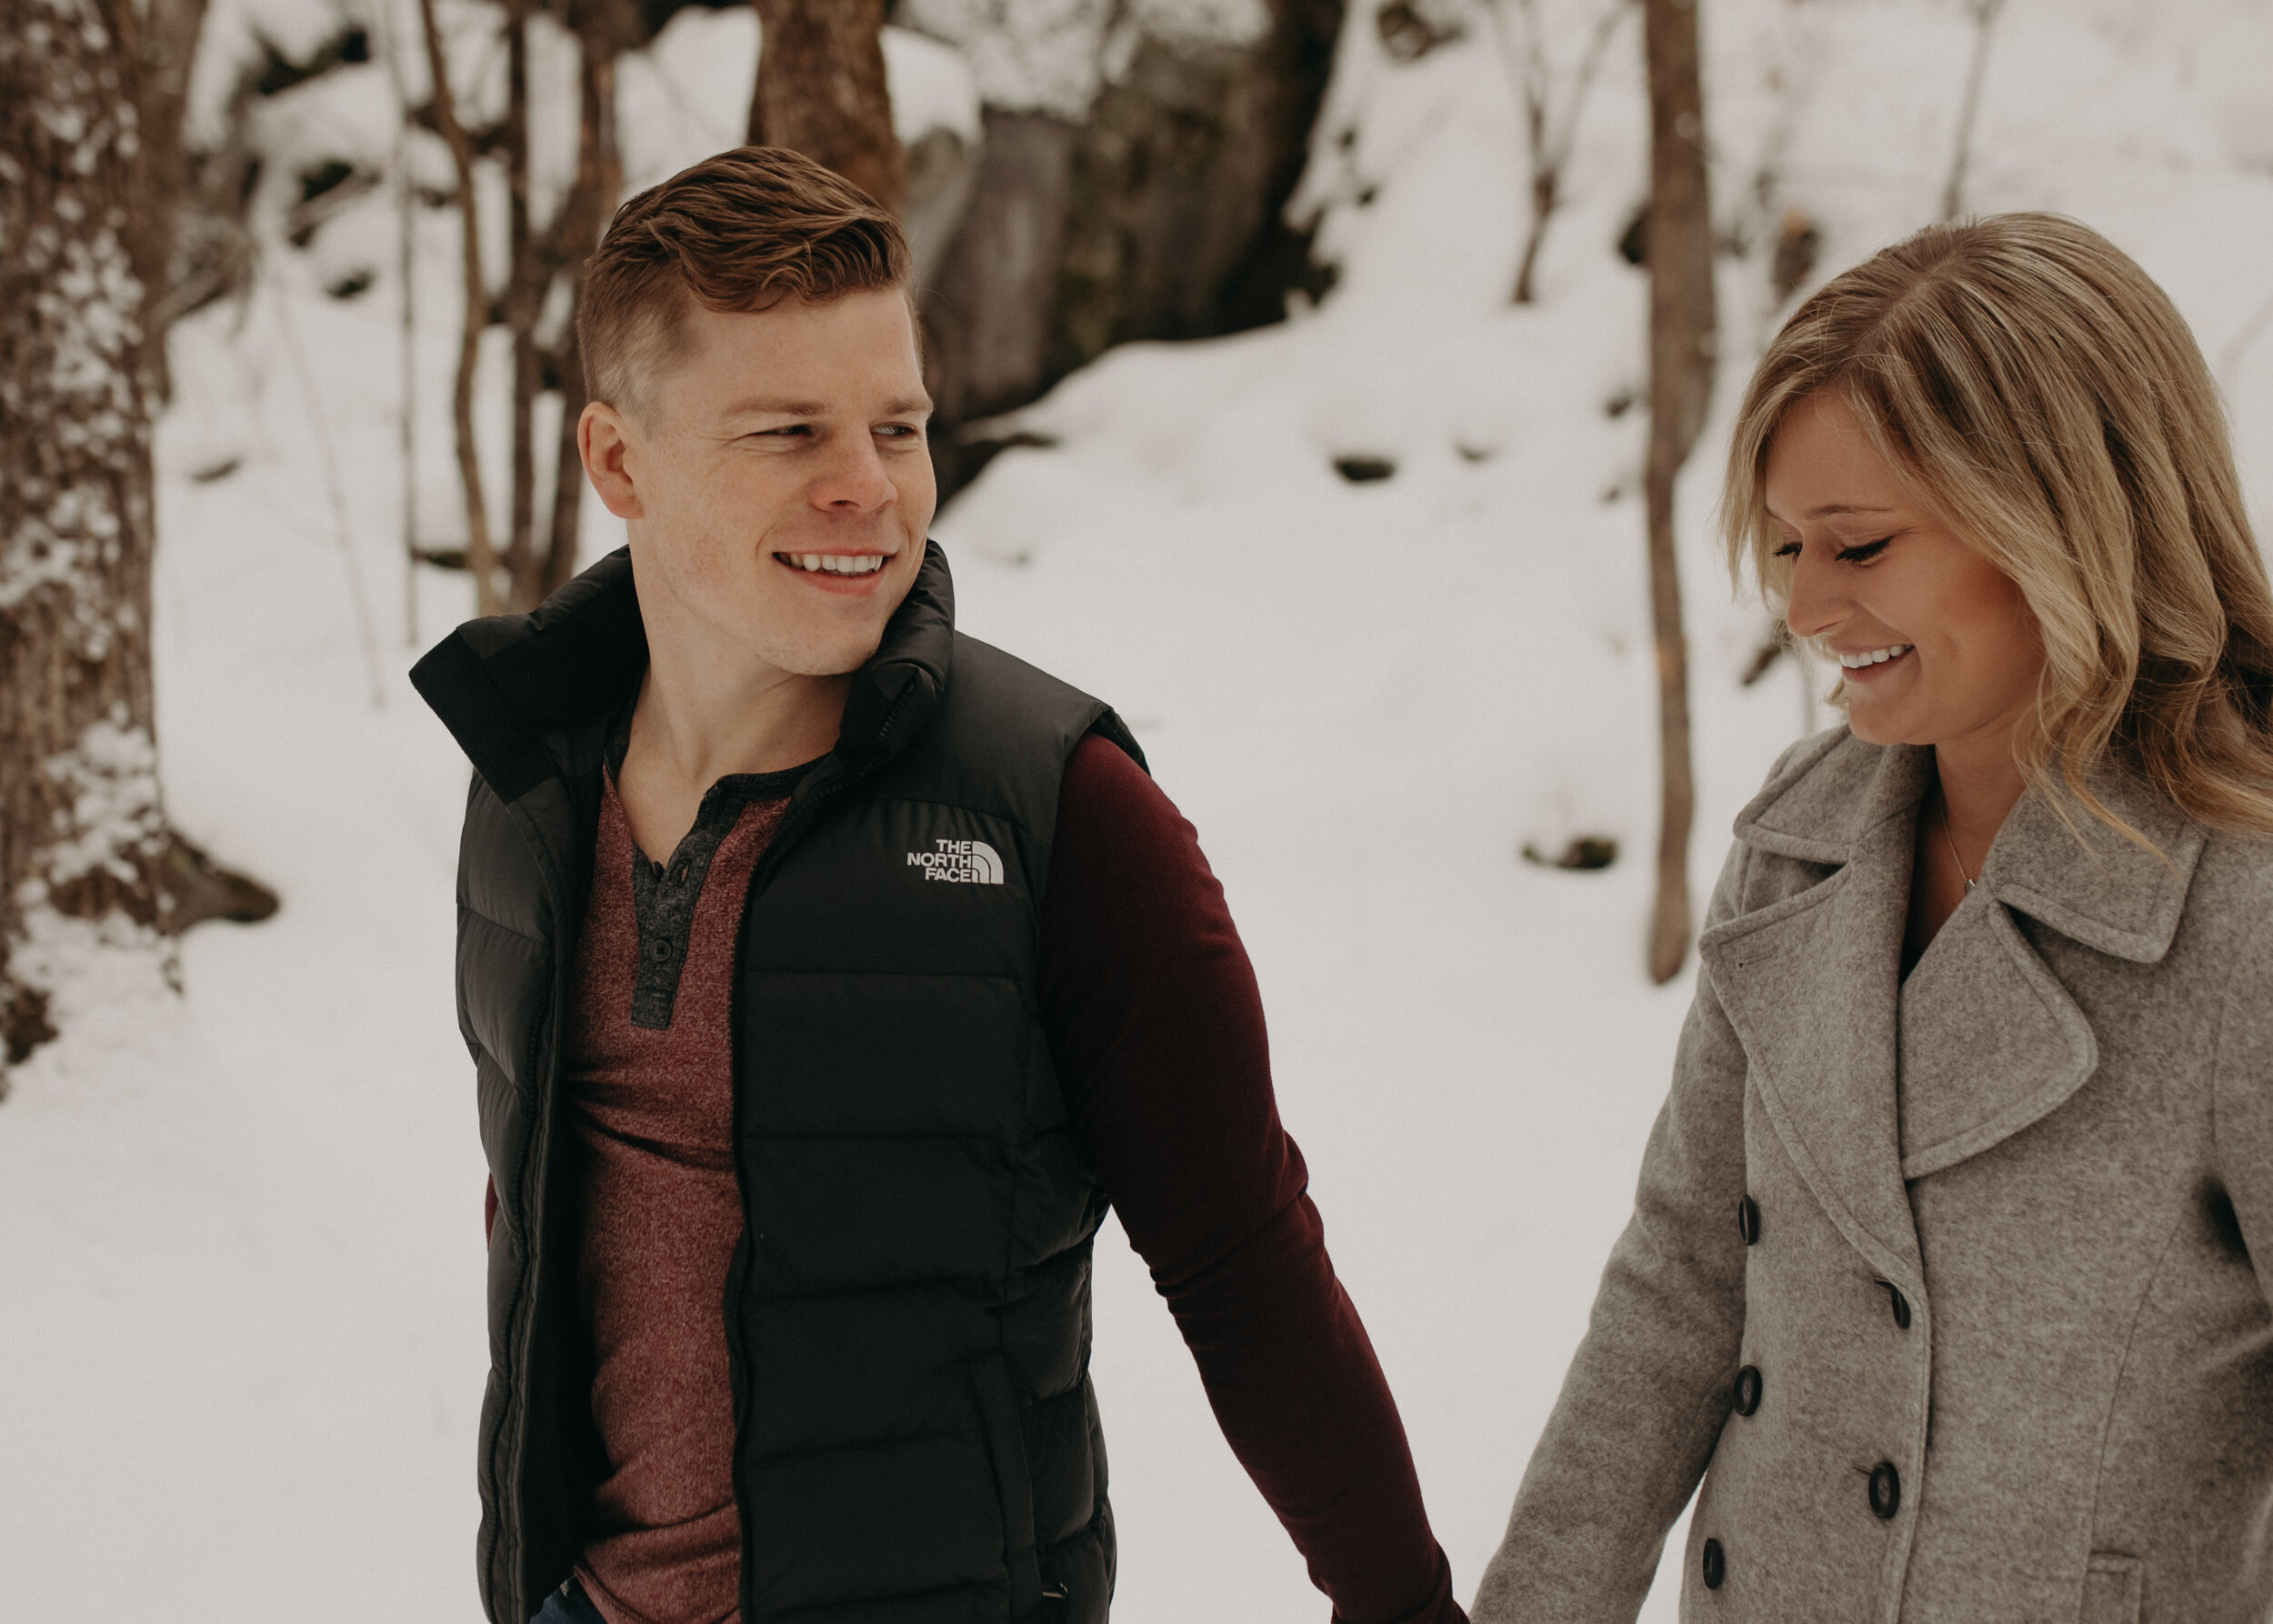  Osceola WI Engagement Session. Interstate State Park Engagement Session. Winter Engagement Session. Winter in Wisconsin Engagement Photoshoot. Wisconsin Couple Photos. Adventurous Couple. Adventurous Engagement Session. Wisconsin Wedding Photographe